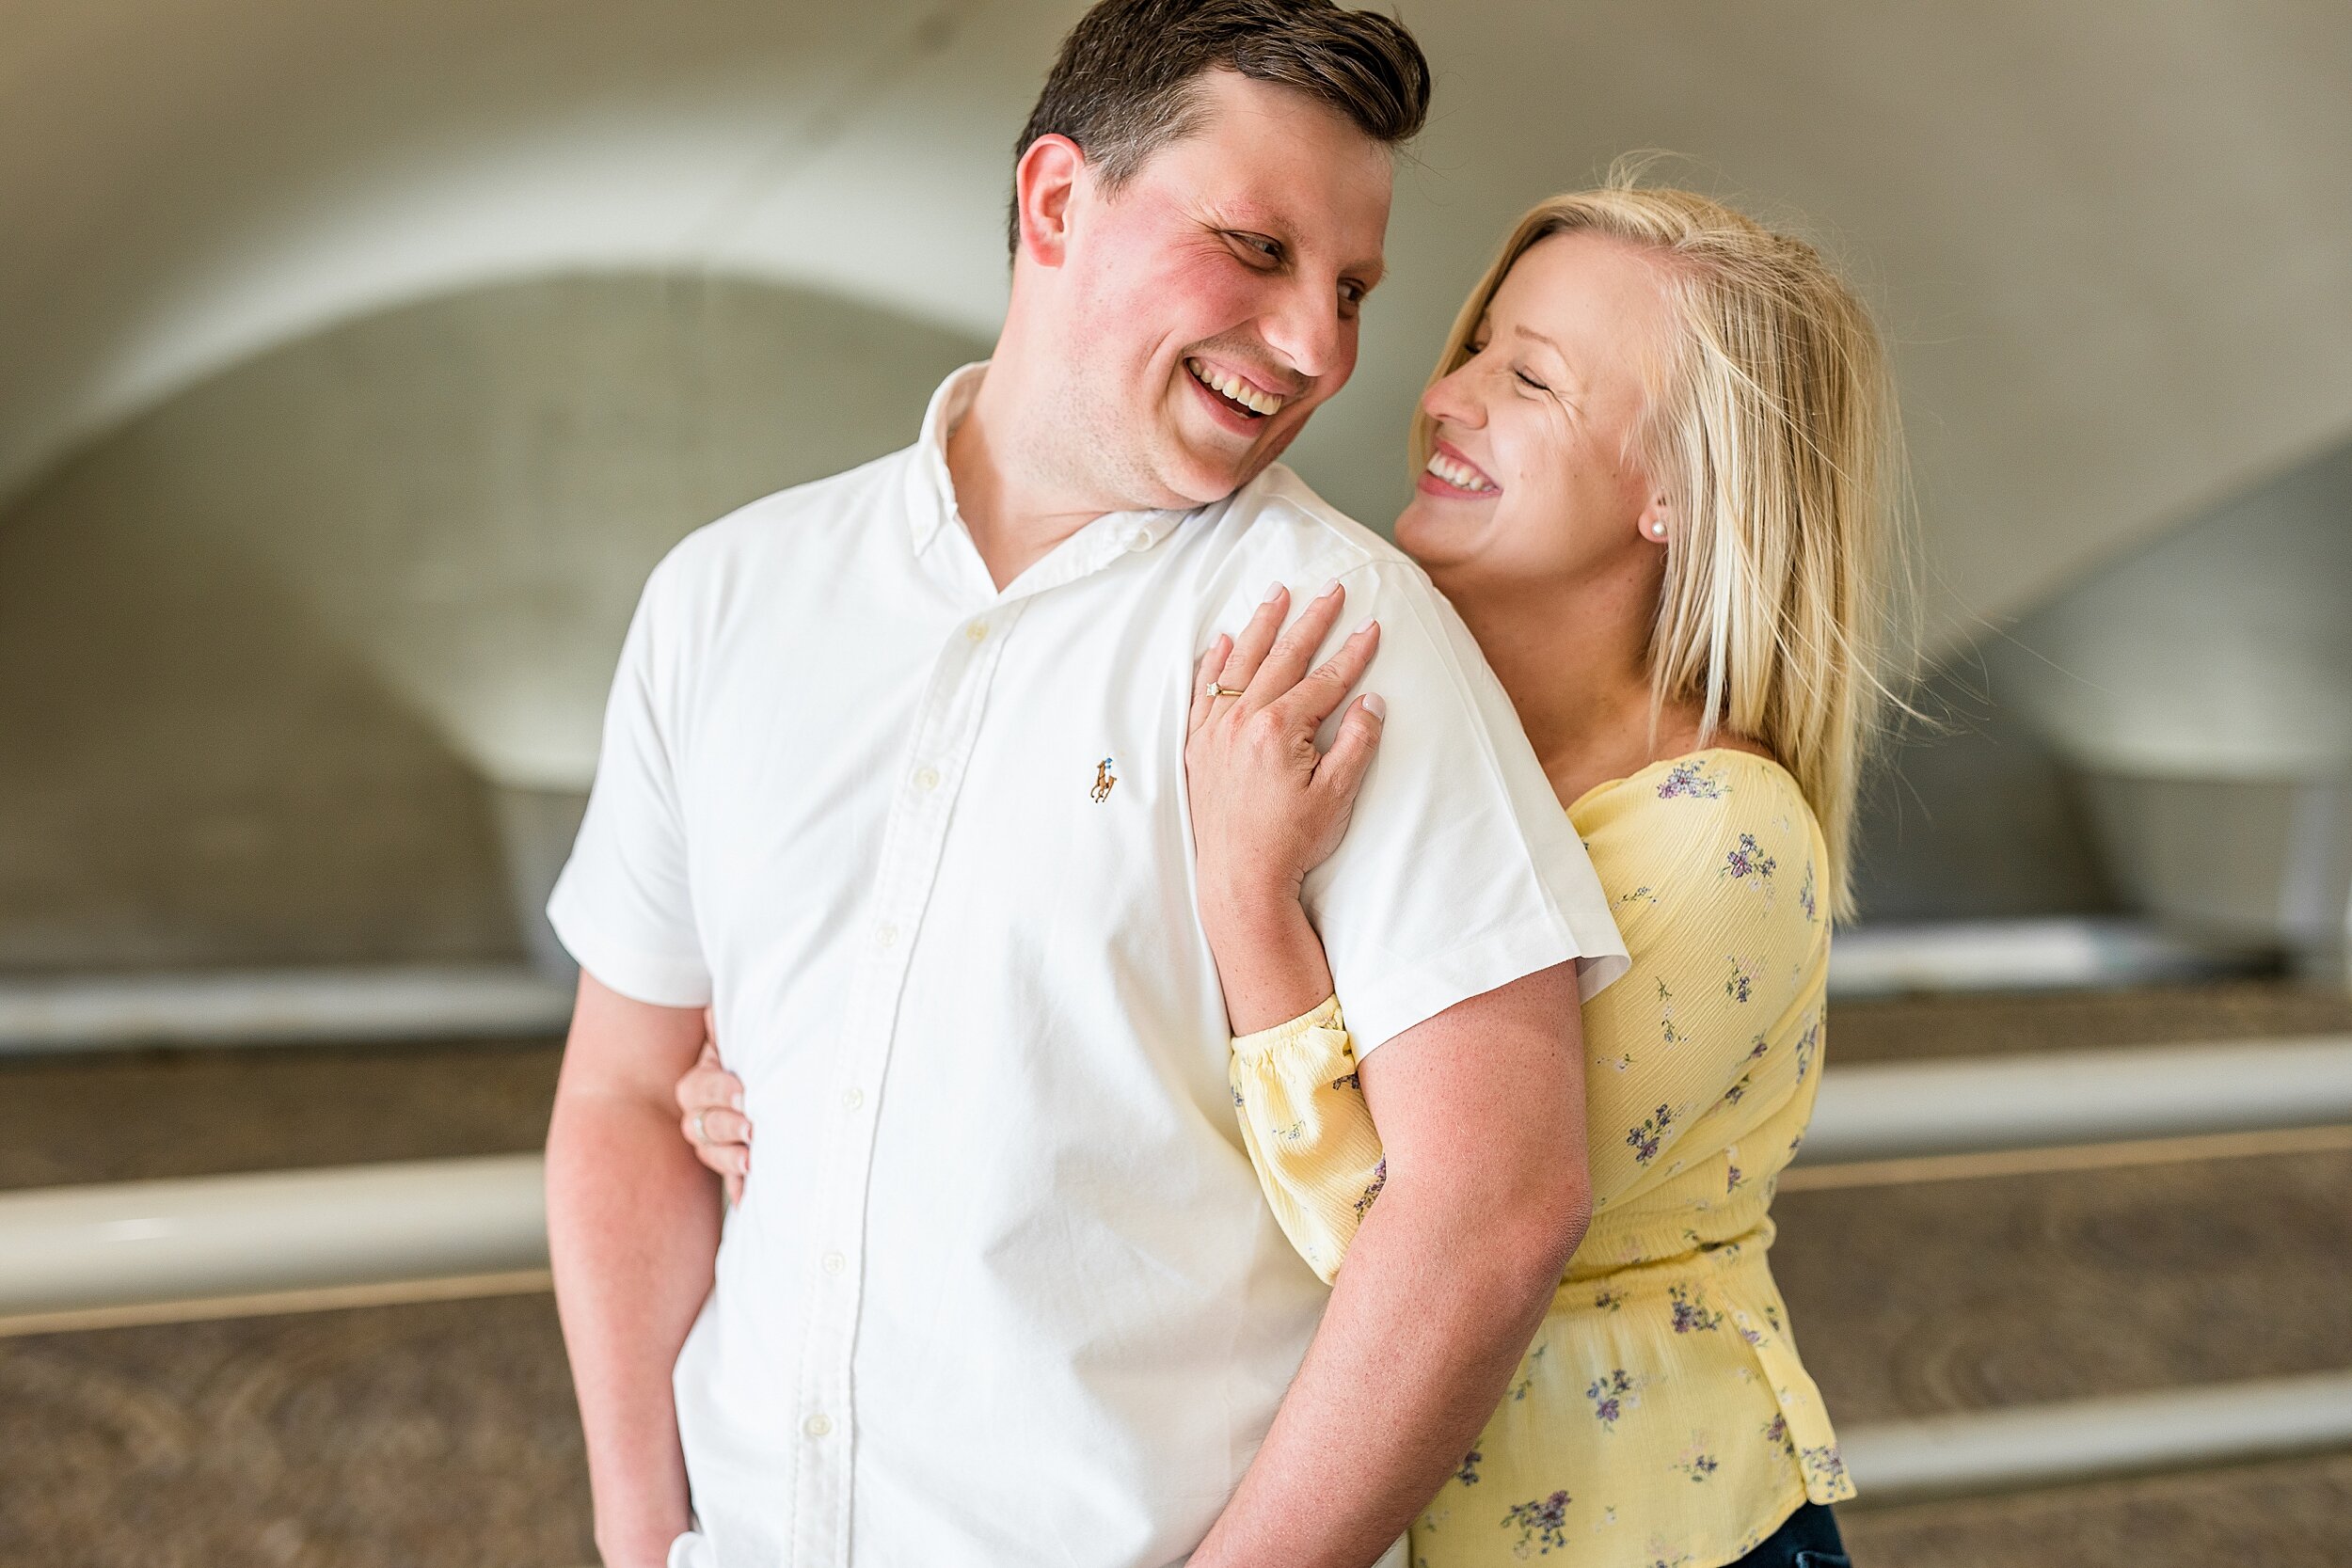 pittsburgh engagement photos, pittsburgh engagment photographer, cranberry township photographer, point state park engagement photos